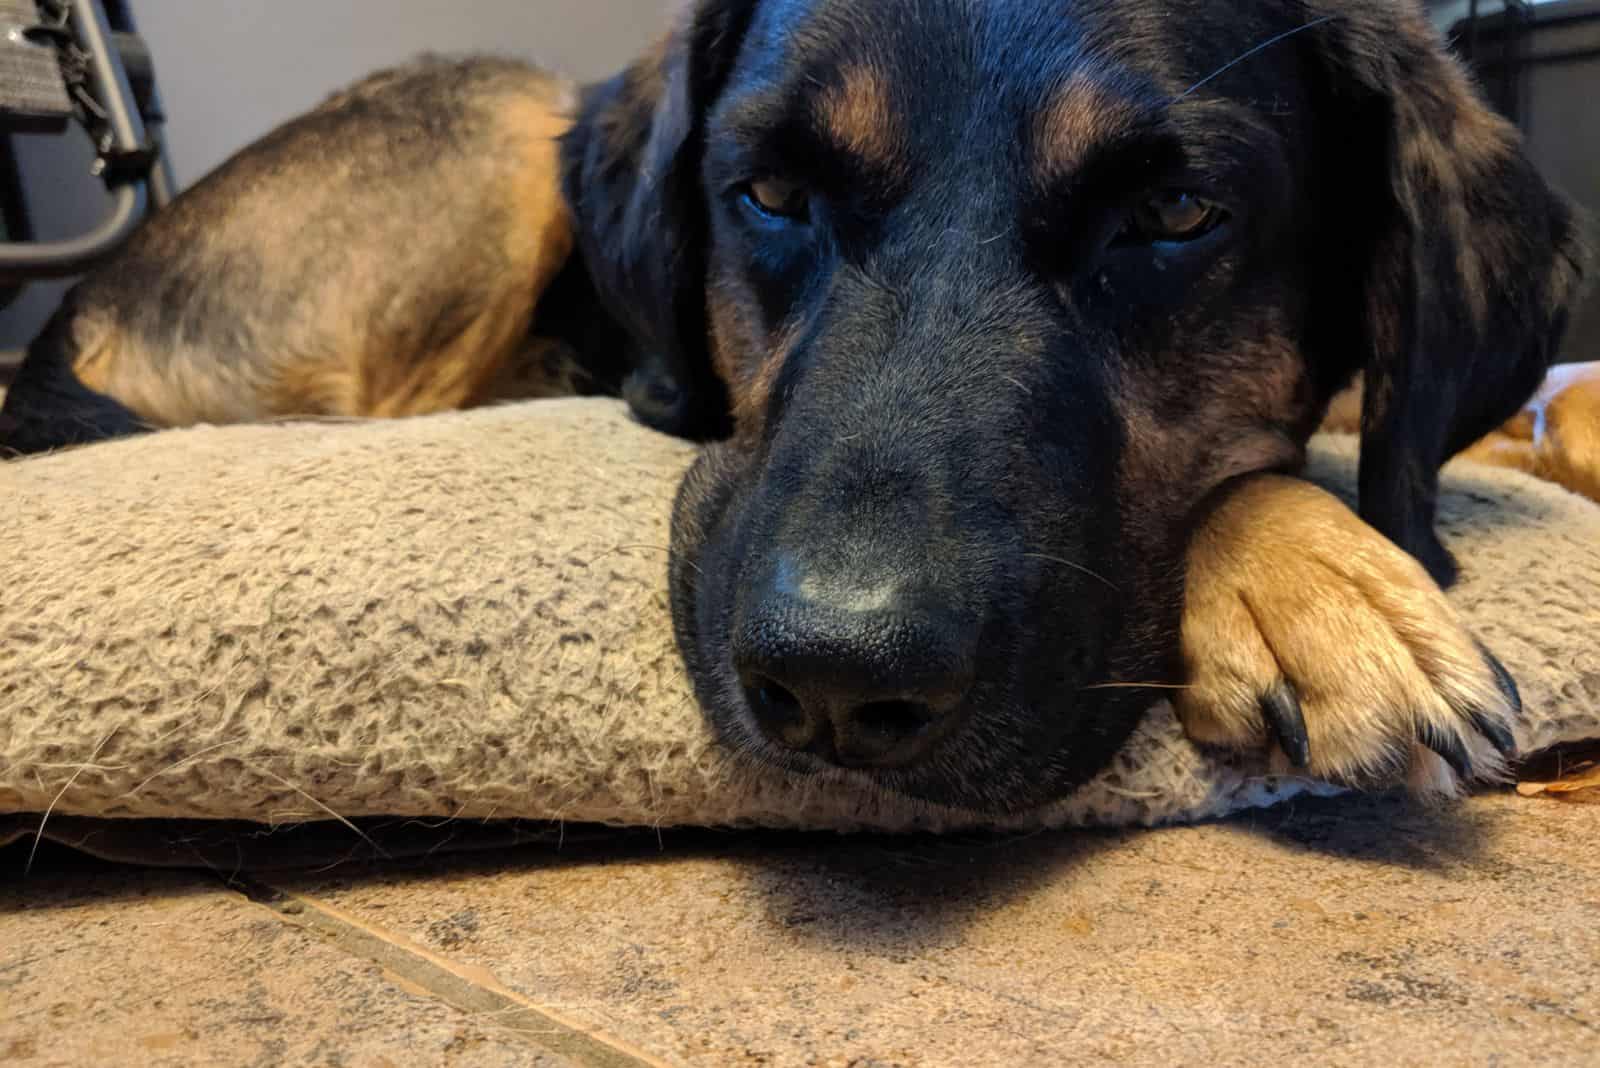 German Shepherd Coonhound Mix is lying down and resting